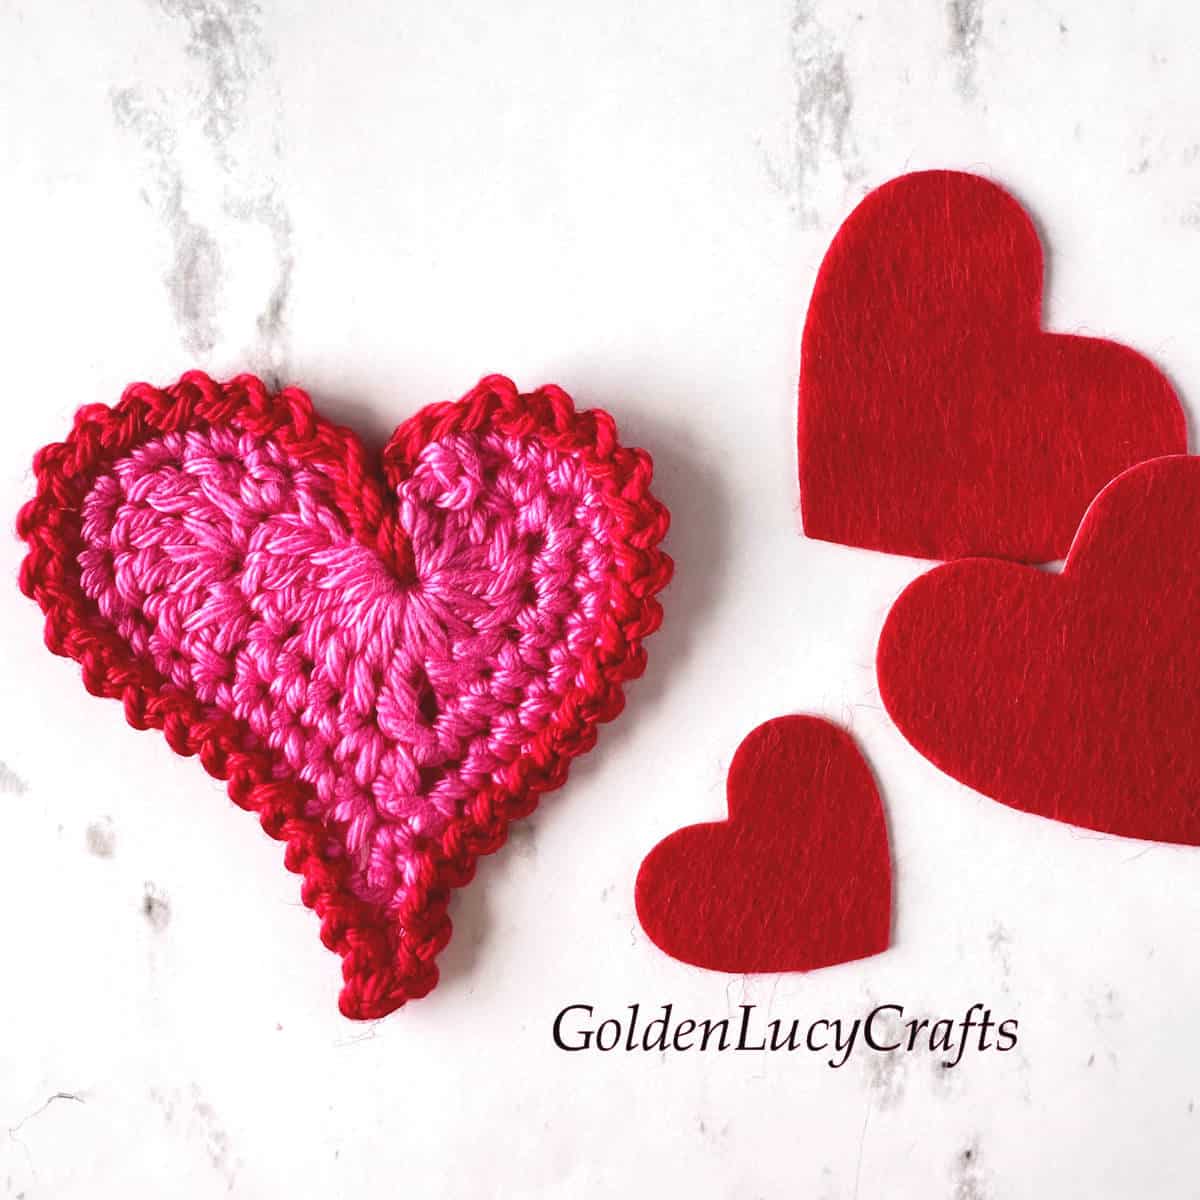 Crochet pink heart with red border.